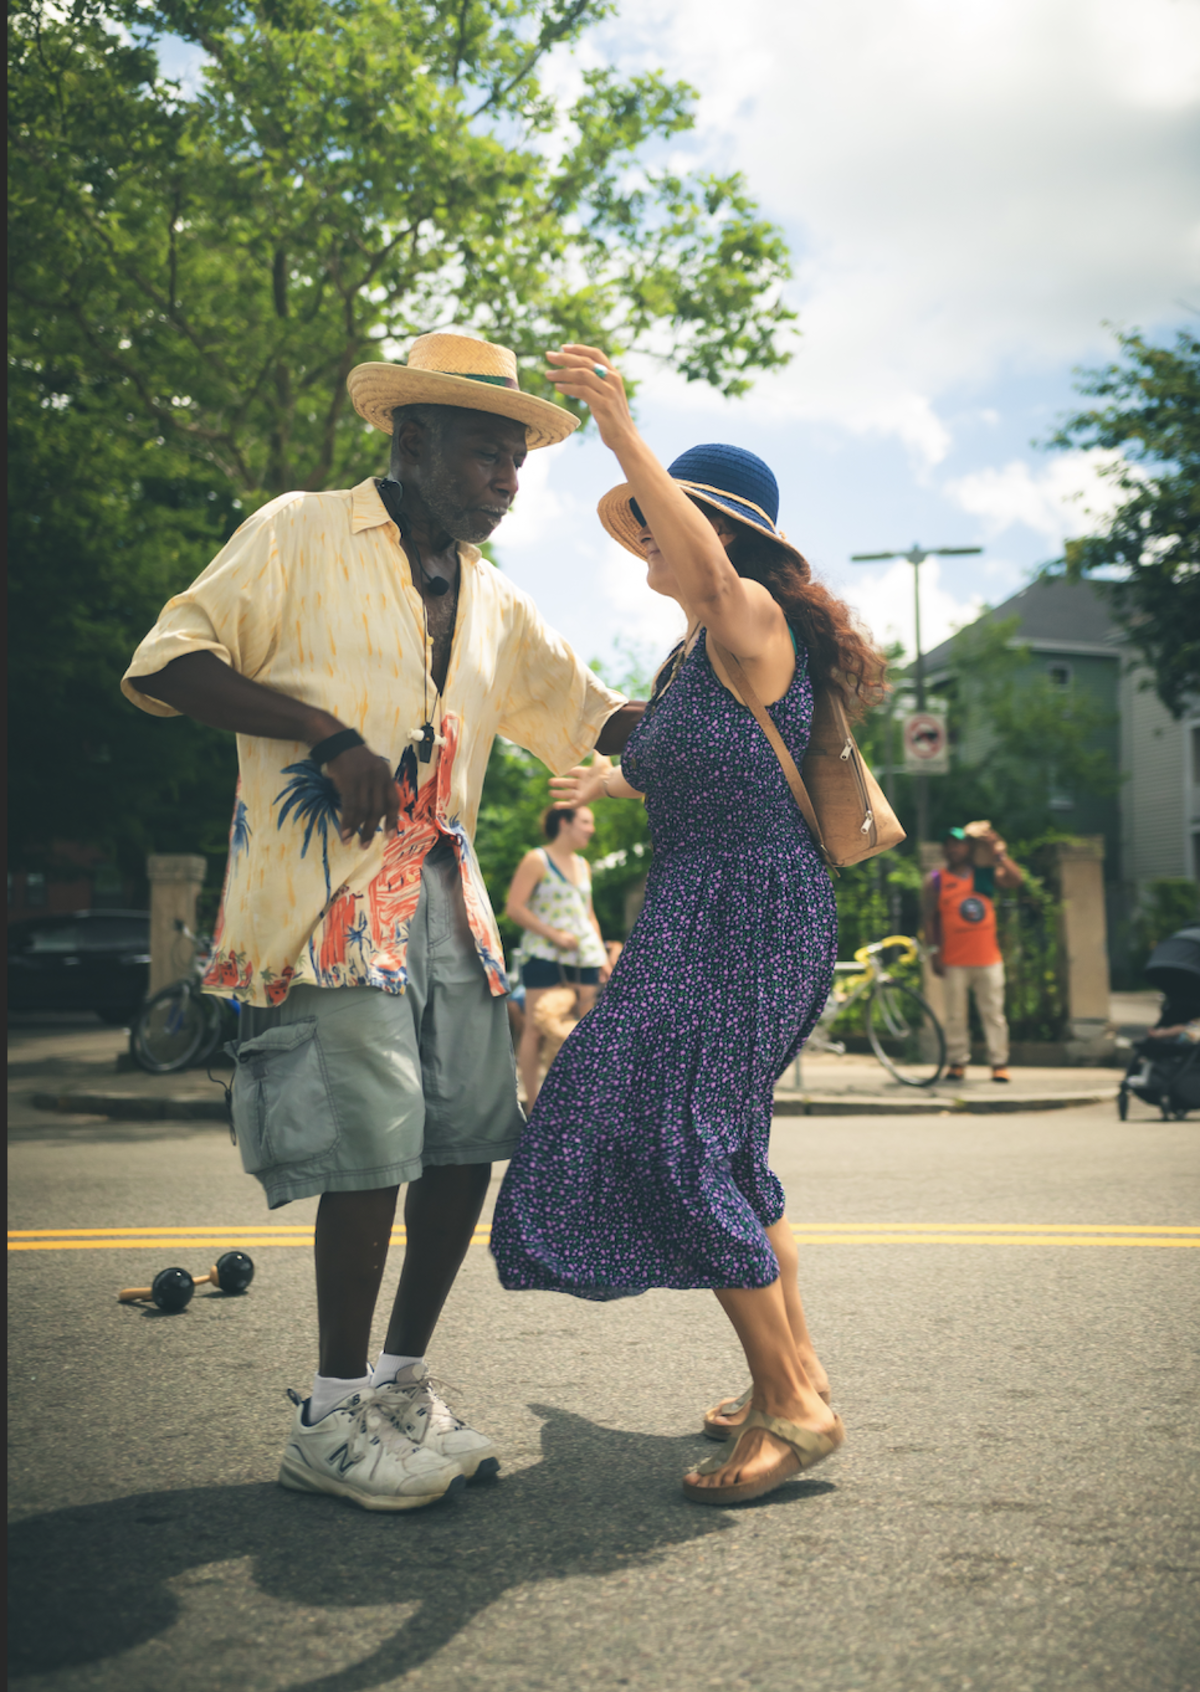 A man in a hat and a woman in a blue dress dance in the middle of the street